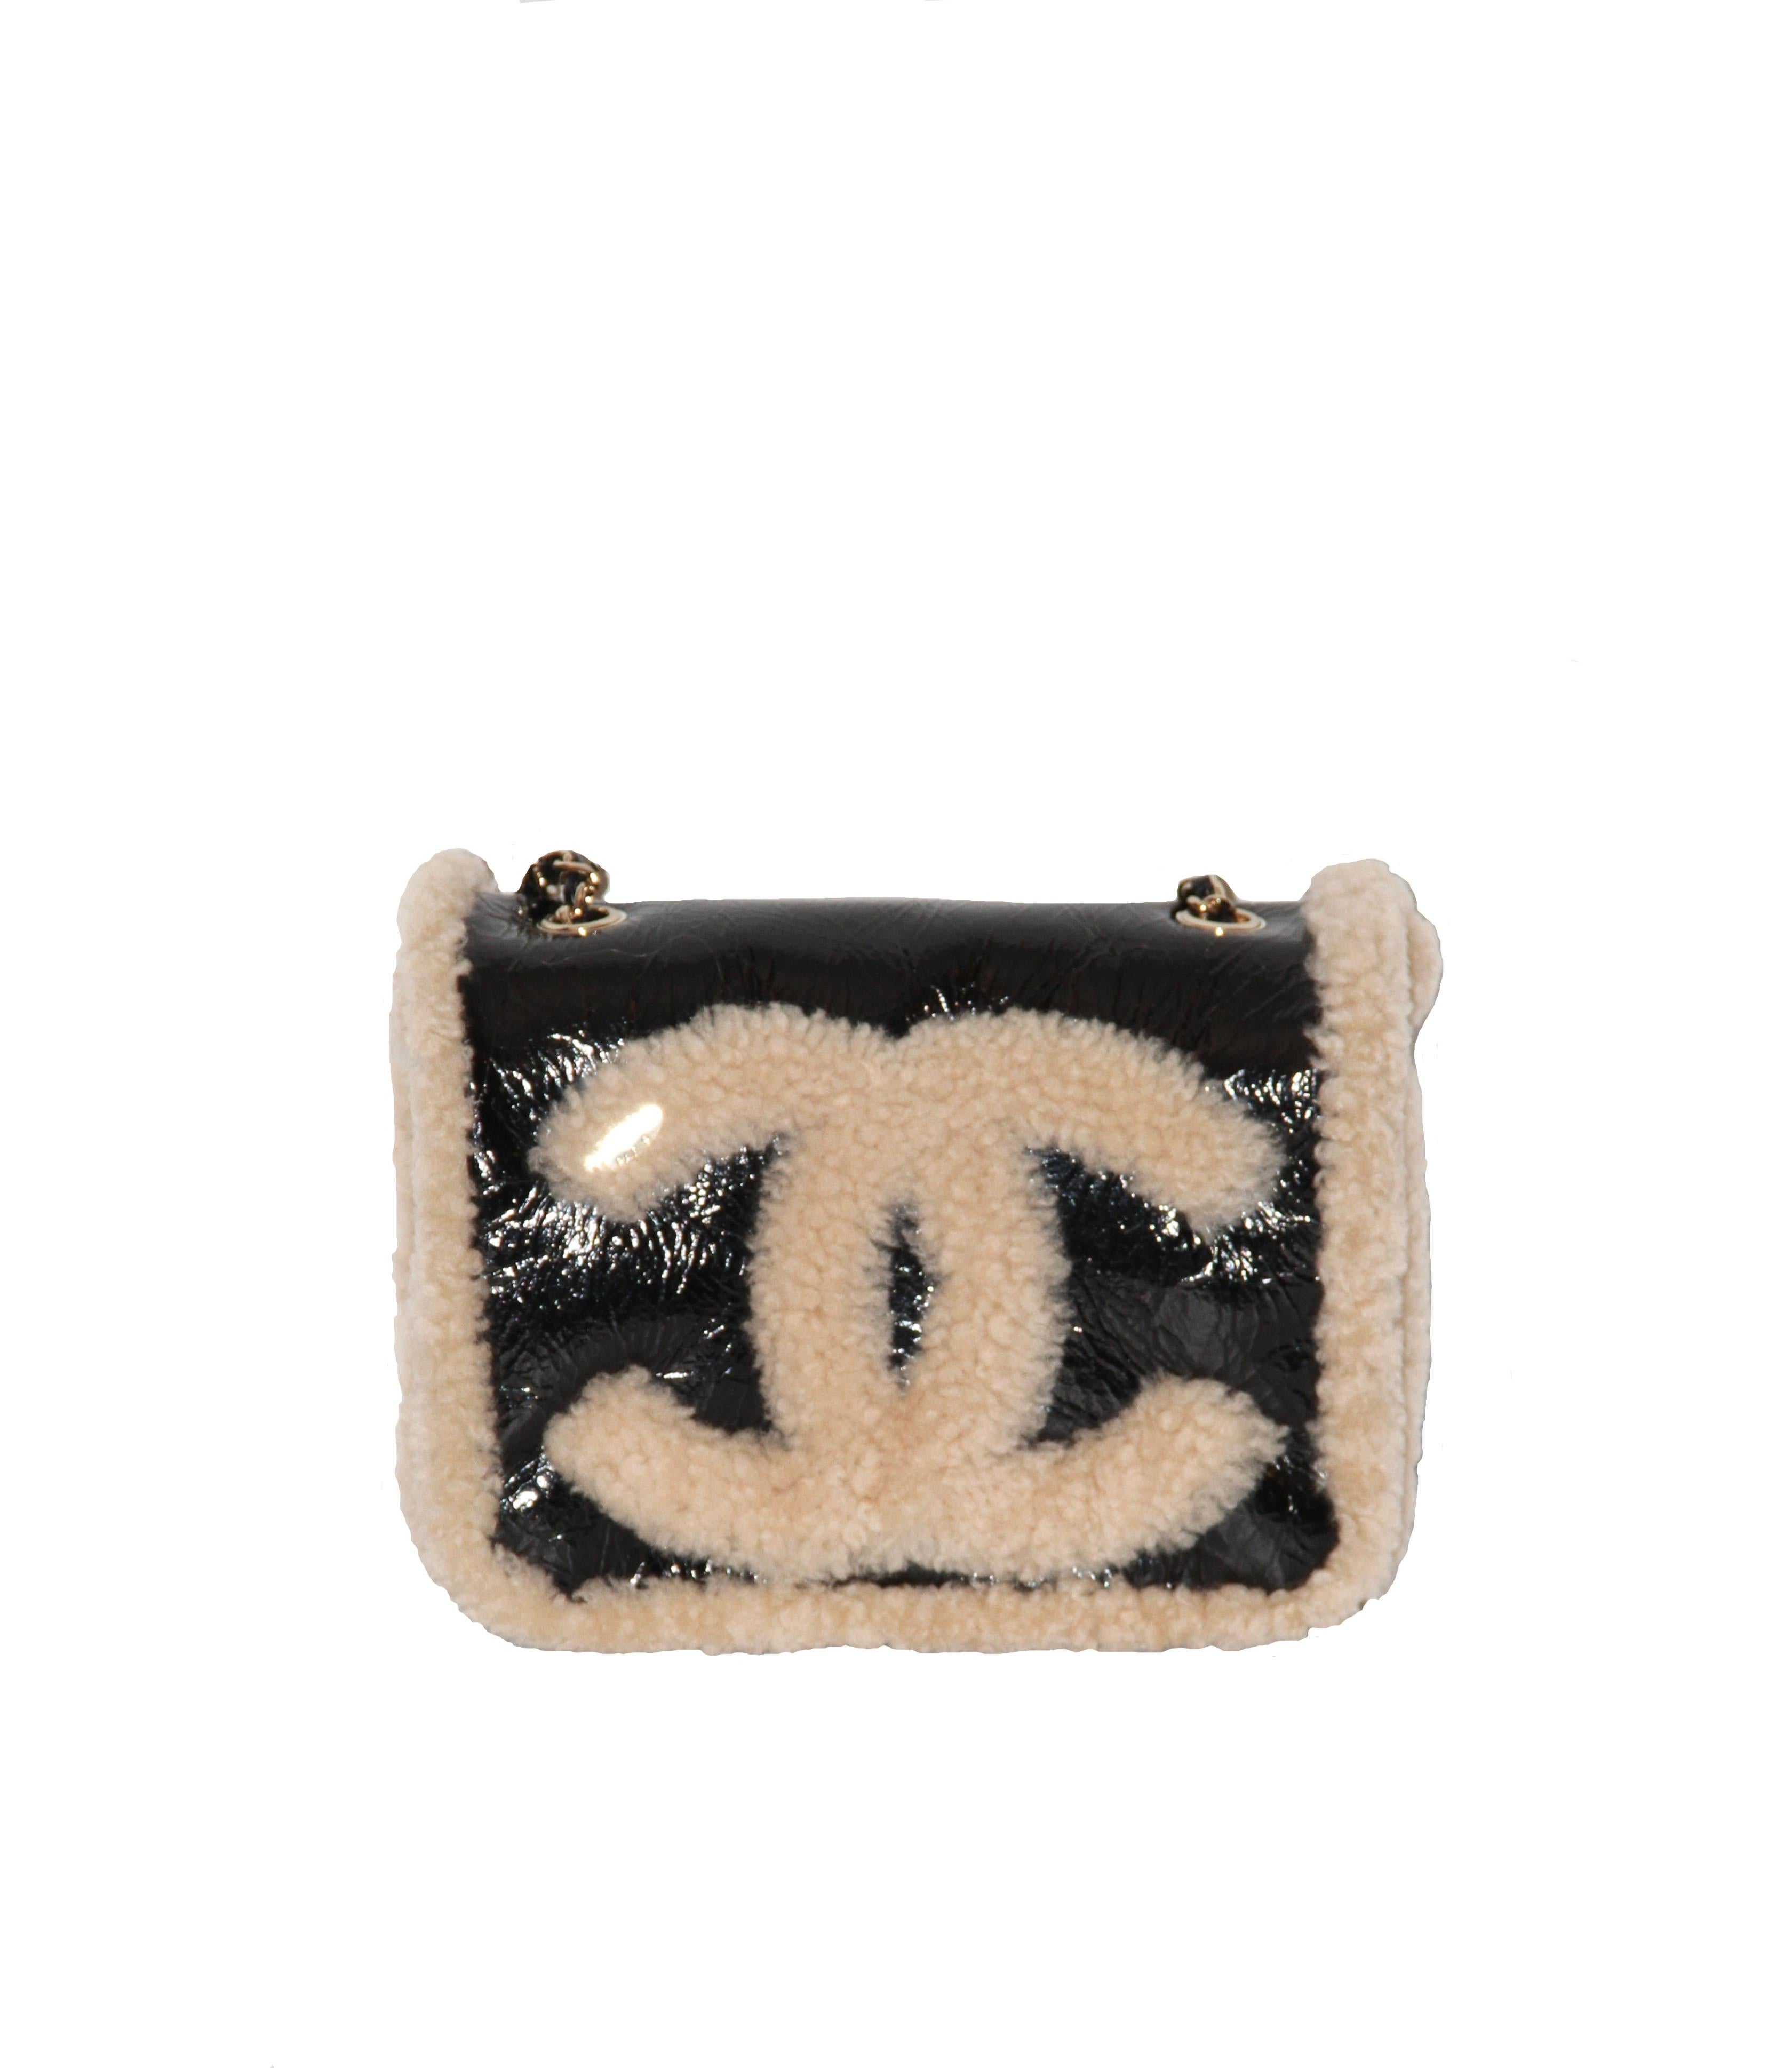 From the Chanel Fall Winter 2019 Collection, this pre-owned but new flap bag is crafted with unique crumpled black sheepskin and beige shearling sheepskin.
The back of the bag is diamond quilted with shearling and the inside is a combination of